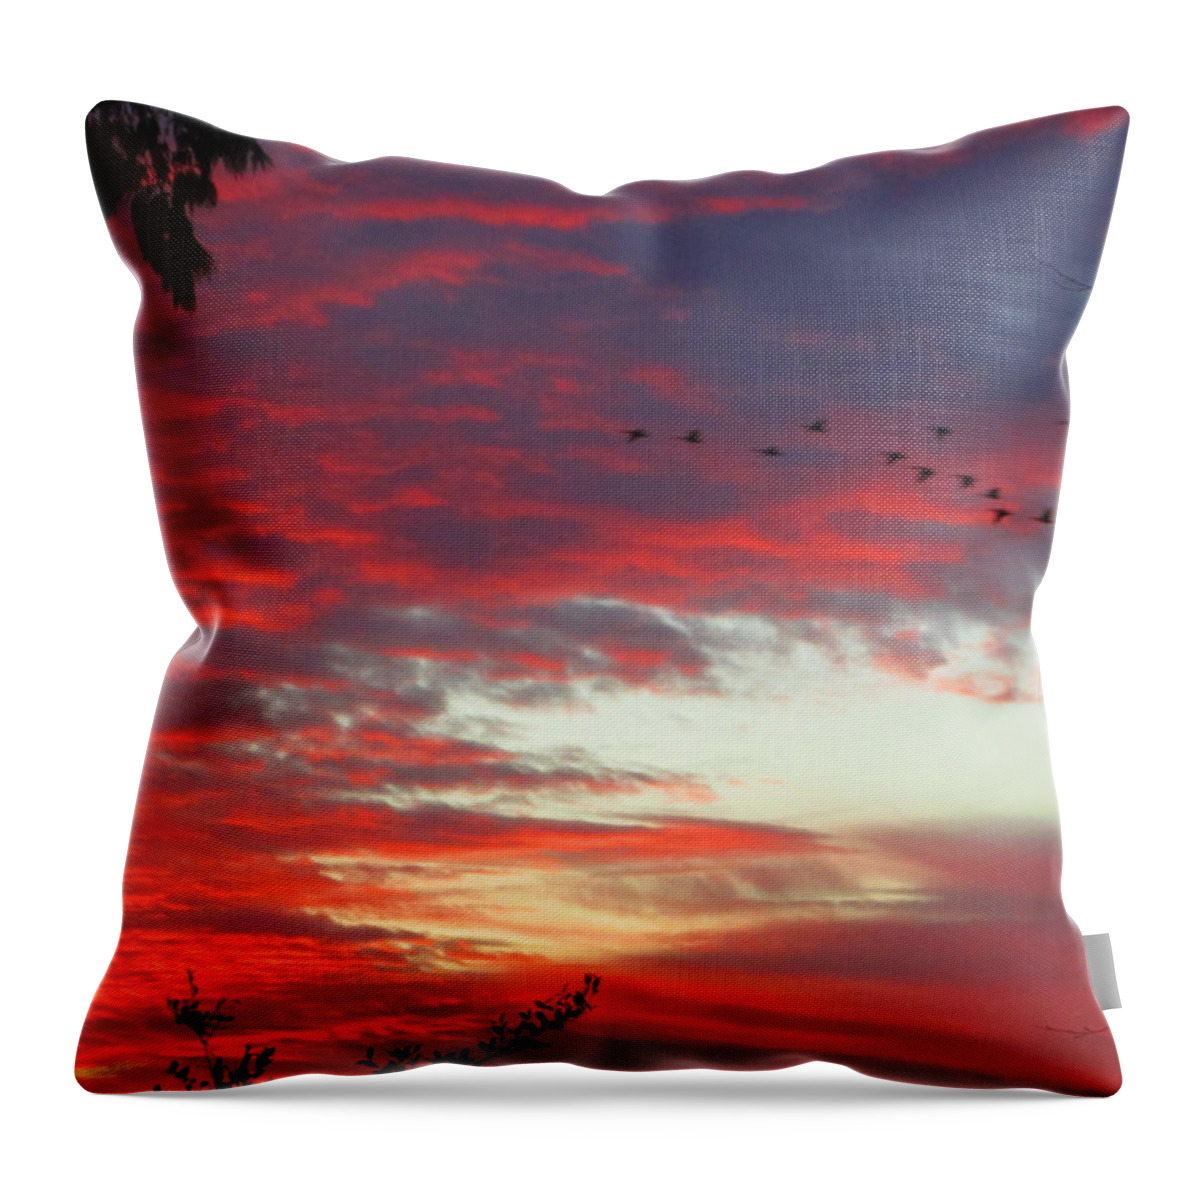 Peach Throw Pillow featuring the photograph Papaya Colored Sunset with Geese by Kym Backland